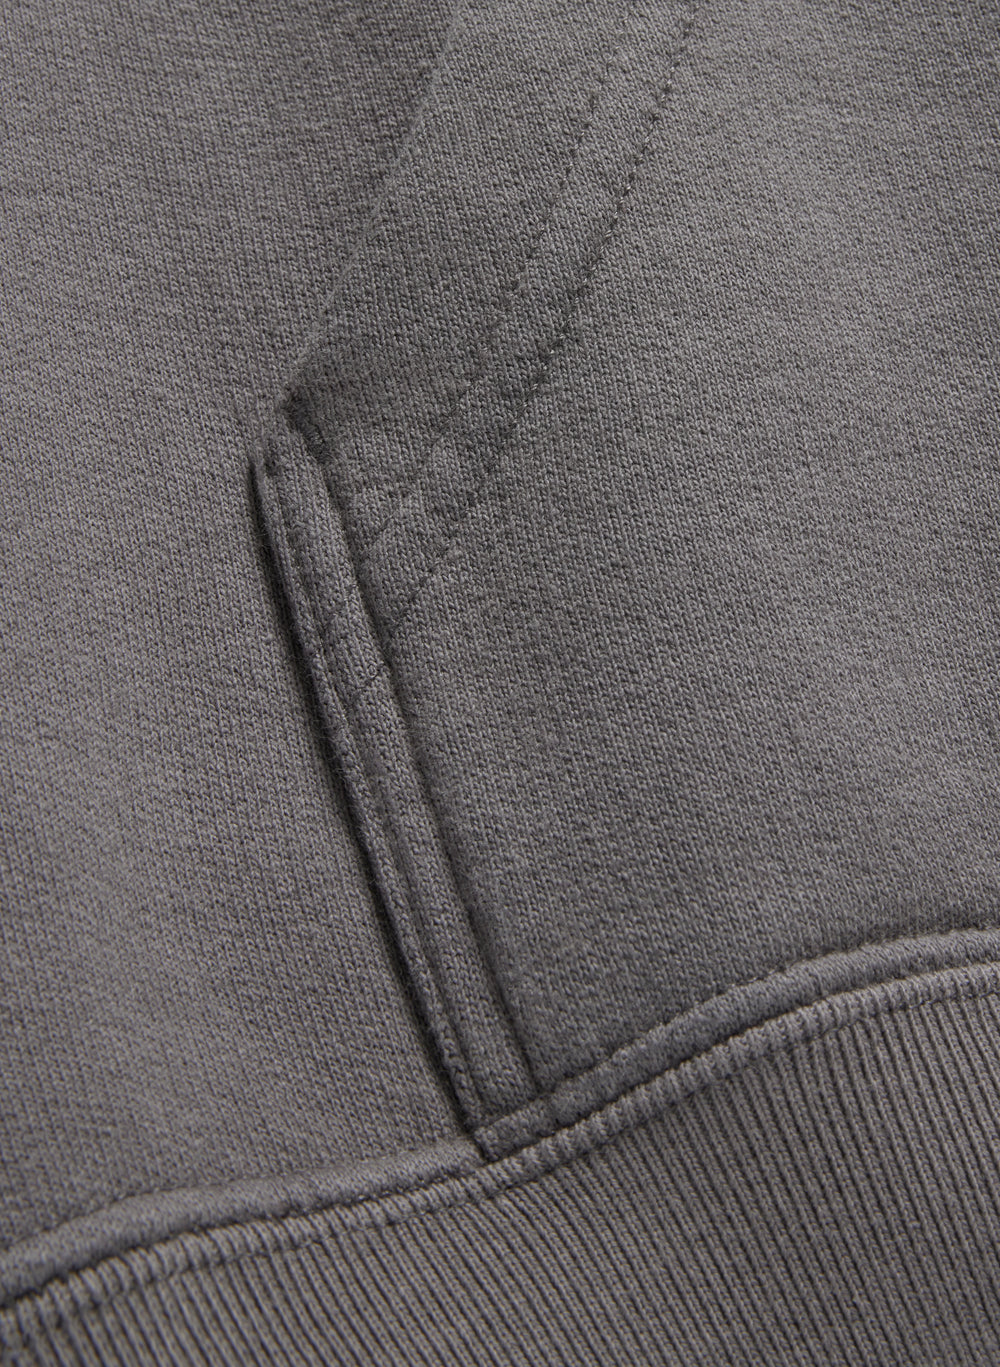 J90 Hoodie - Charcoal French Terry